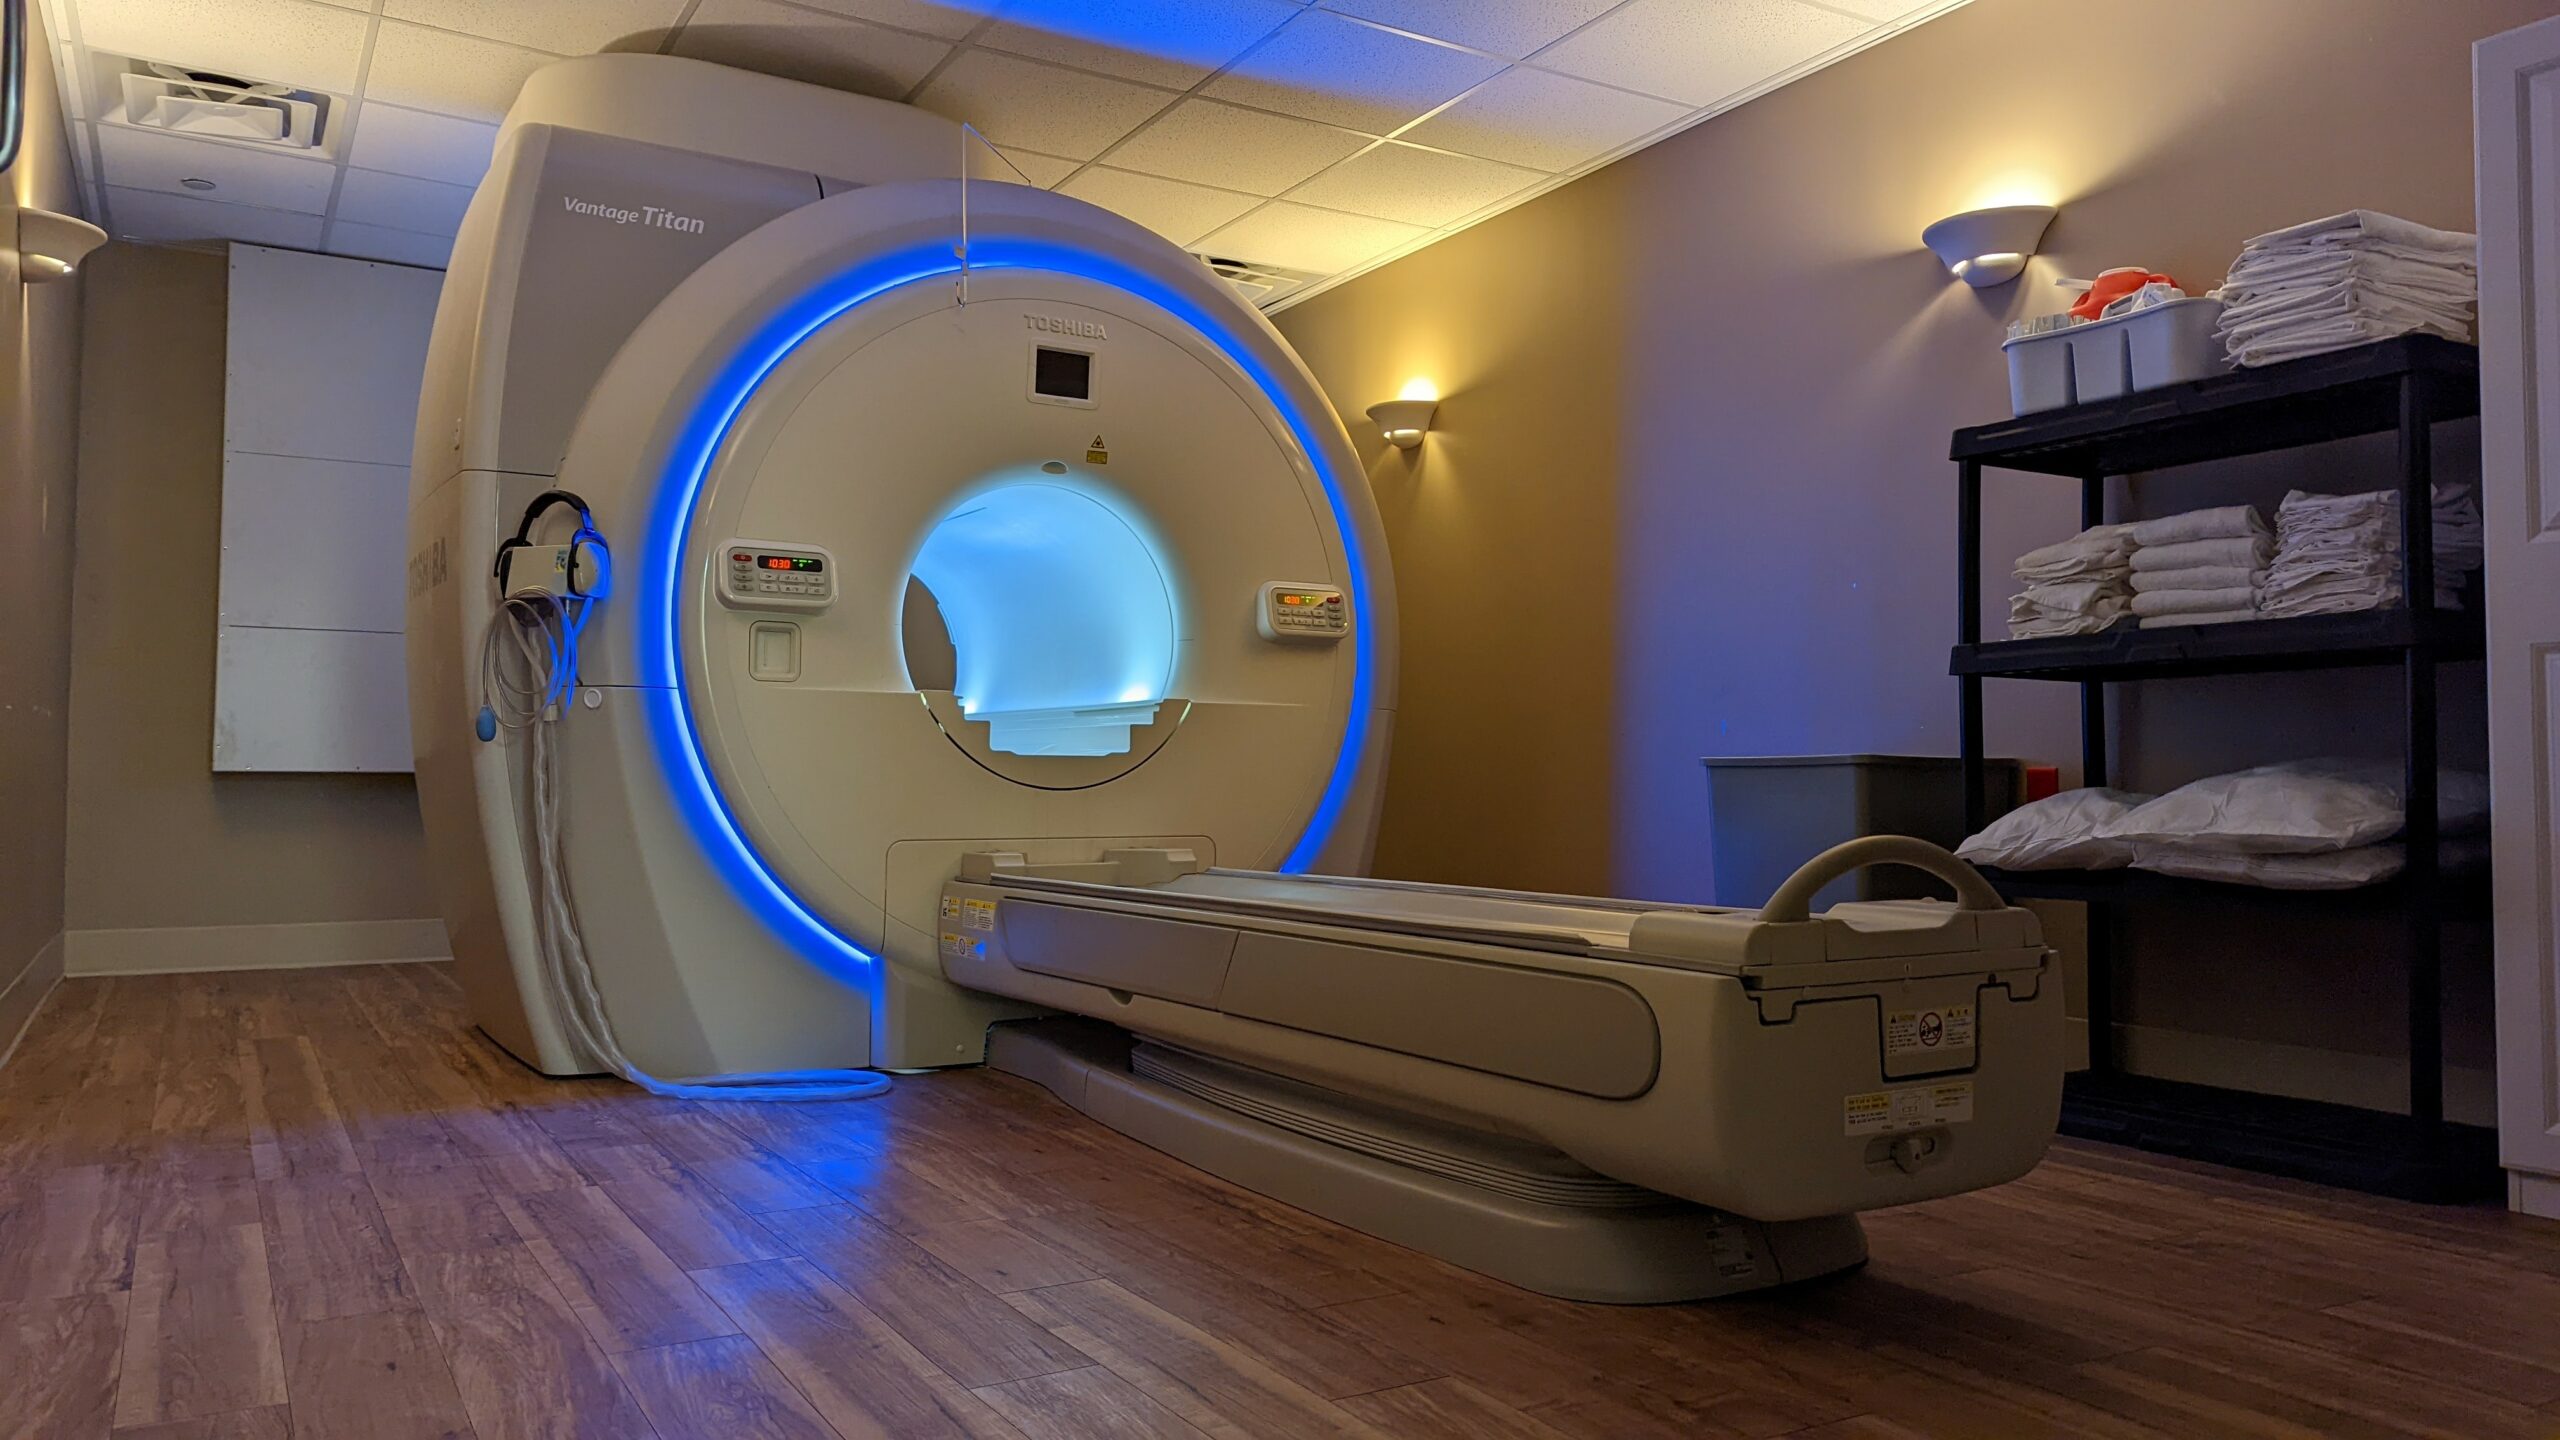 Haskell Memorial Hospital offers Radiology Services